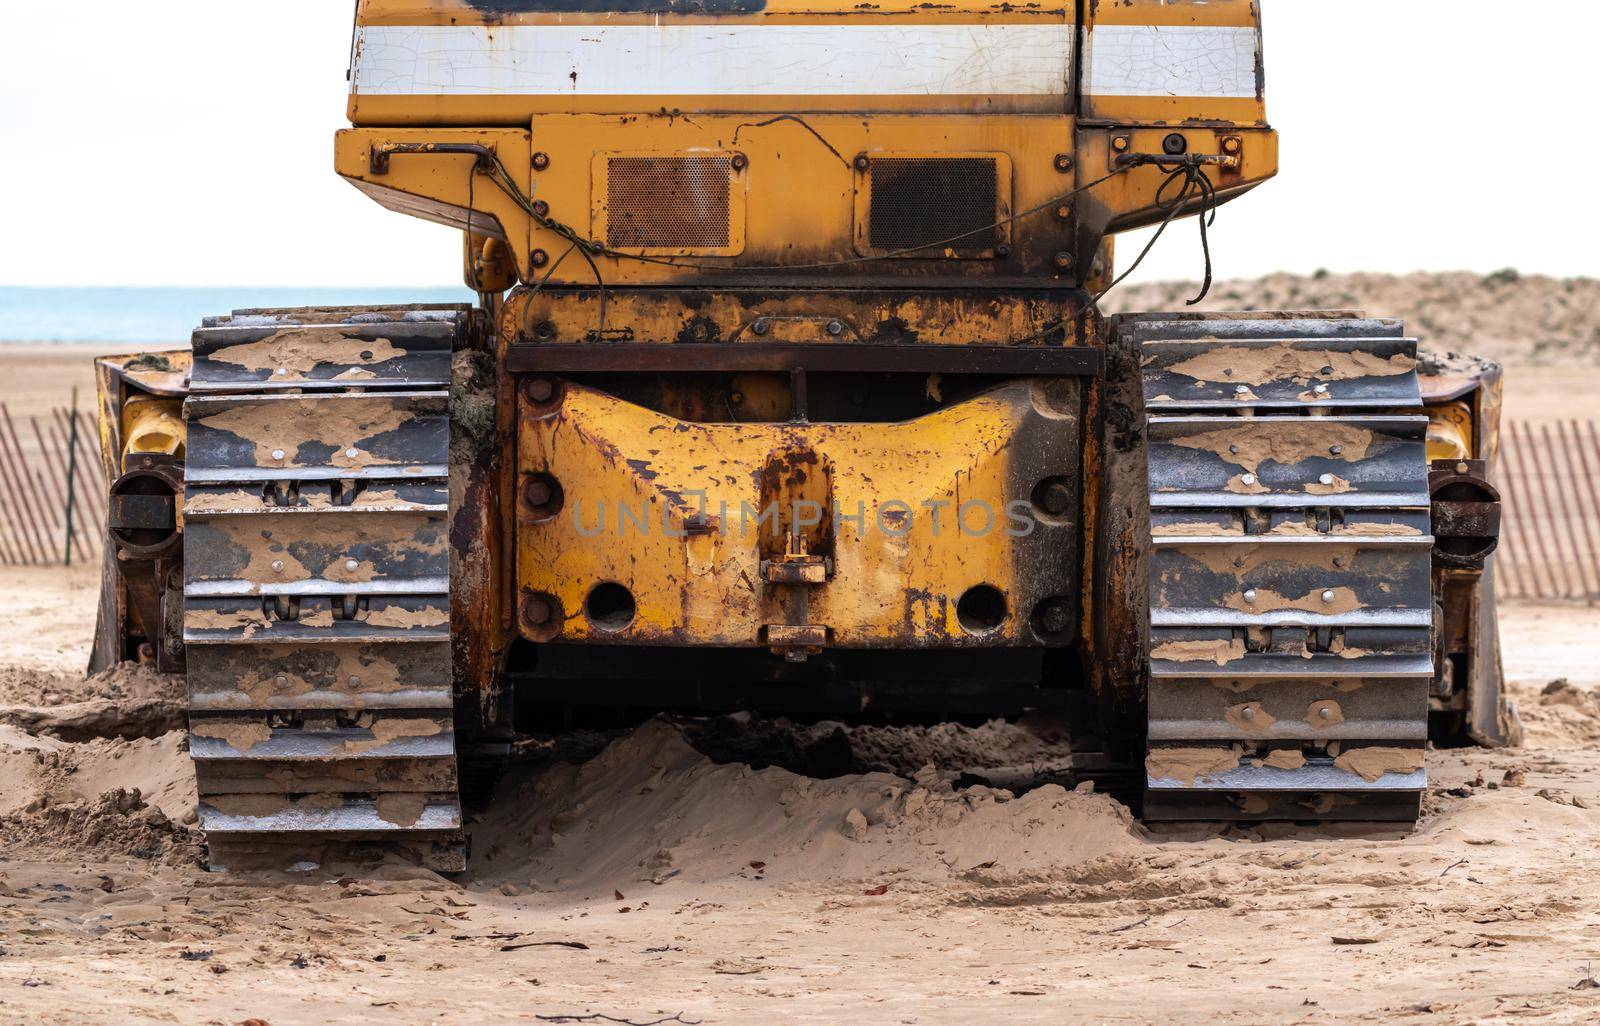 A closeup photograph of the back of an old large industrial yellow bulldozer machine weathered, worn and rusty sitting on a beach in Chicago. by lapse_life